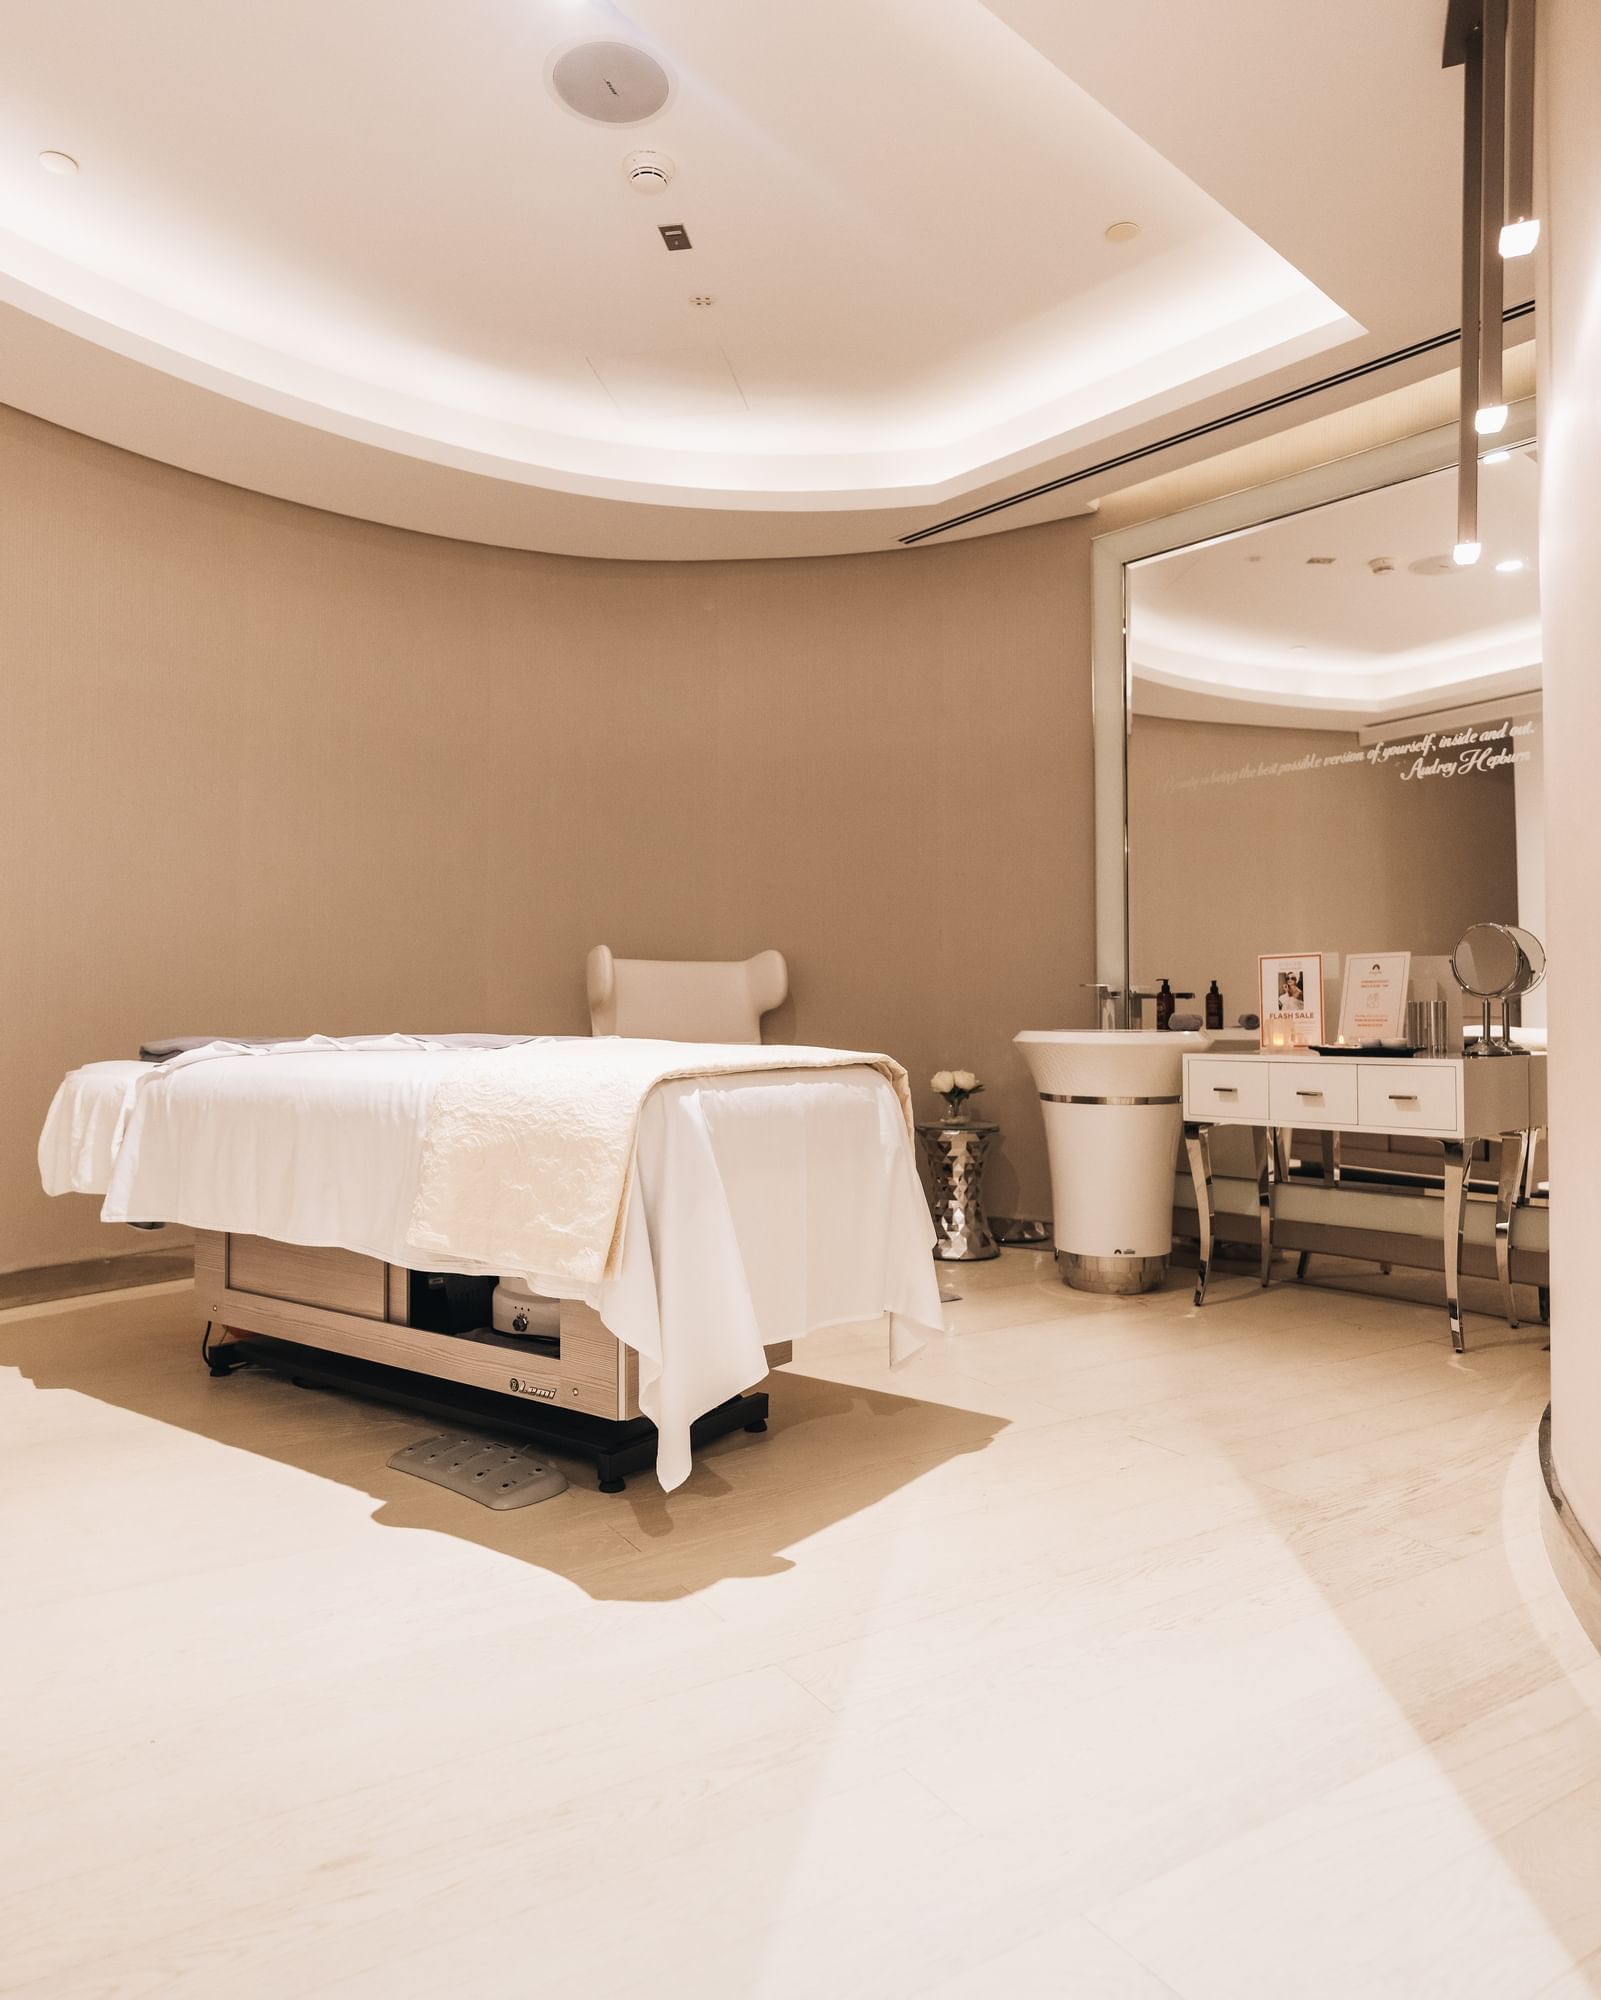 Massage bed with large mirror & amenities in Pause Spa at Paramount Hotel Dubai